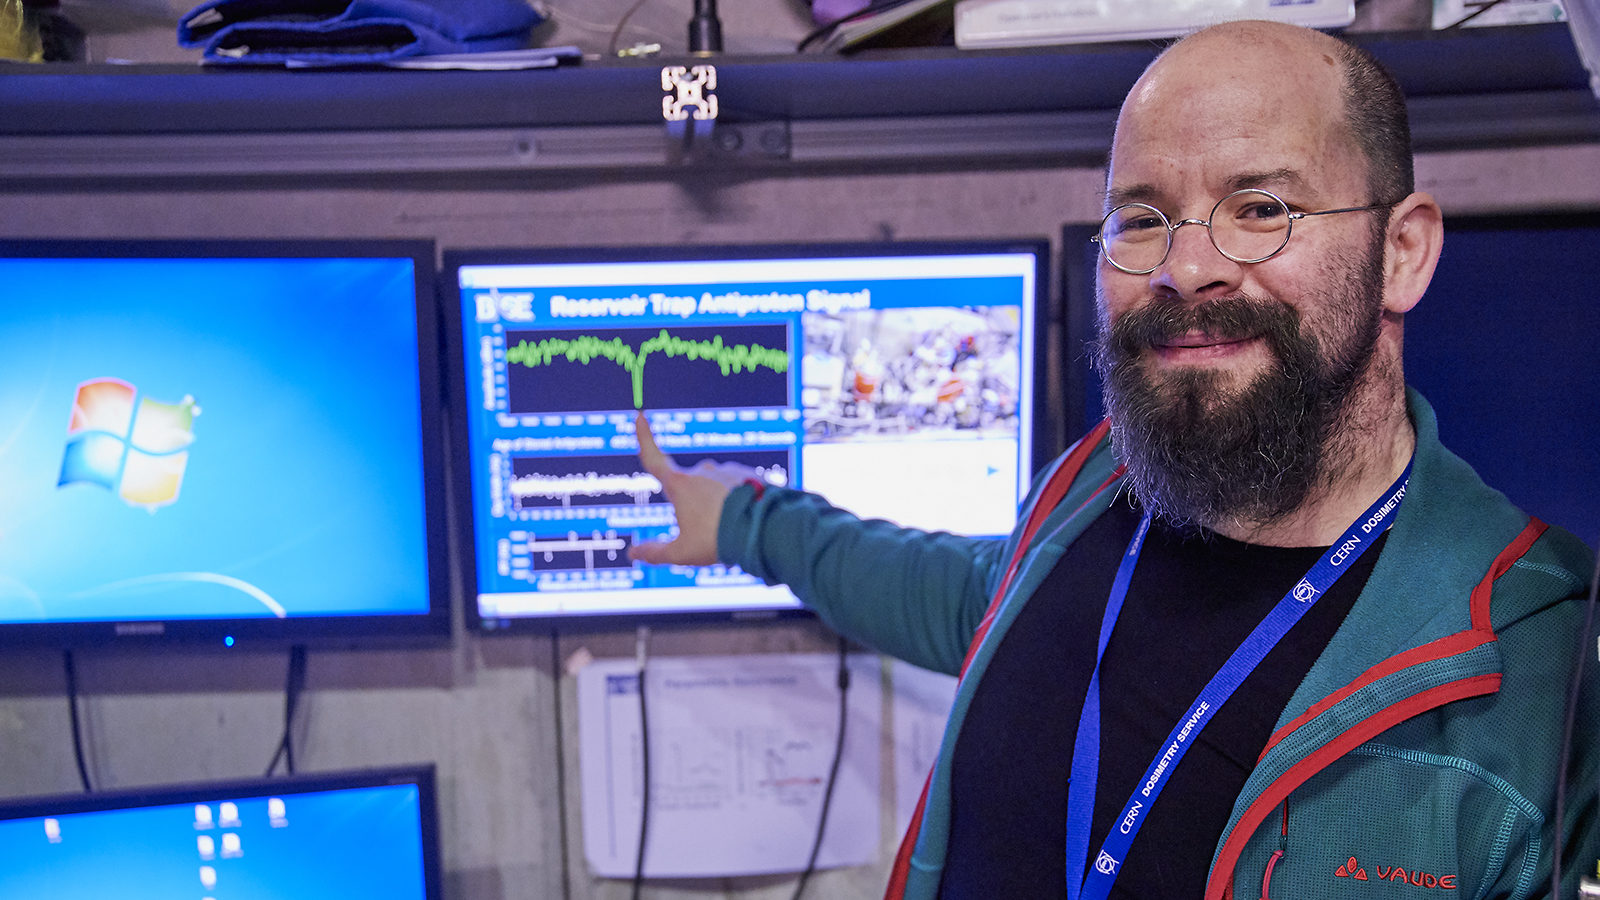 Stefan Ulmer, spokesperson of BASE collaboration, points at a screen with data about a 405-day-old antiproton